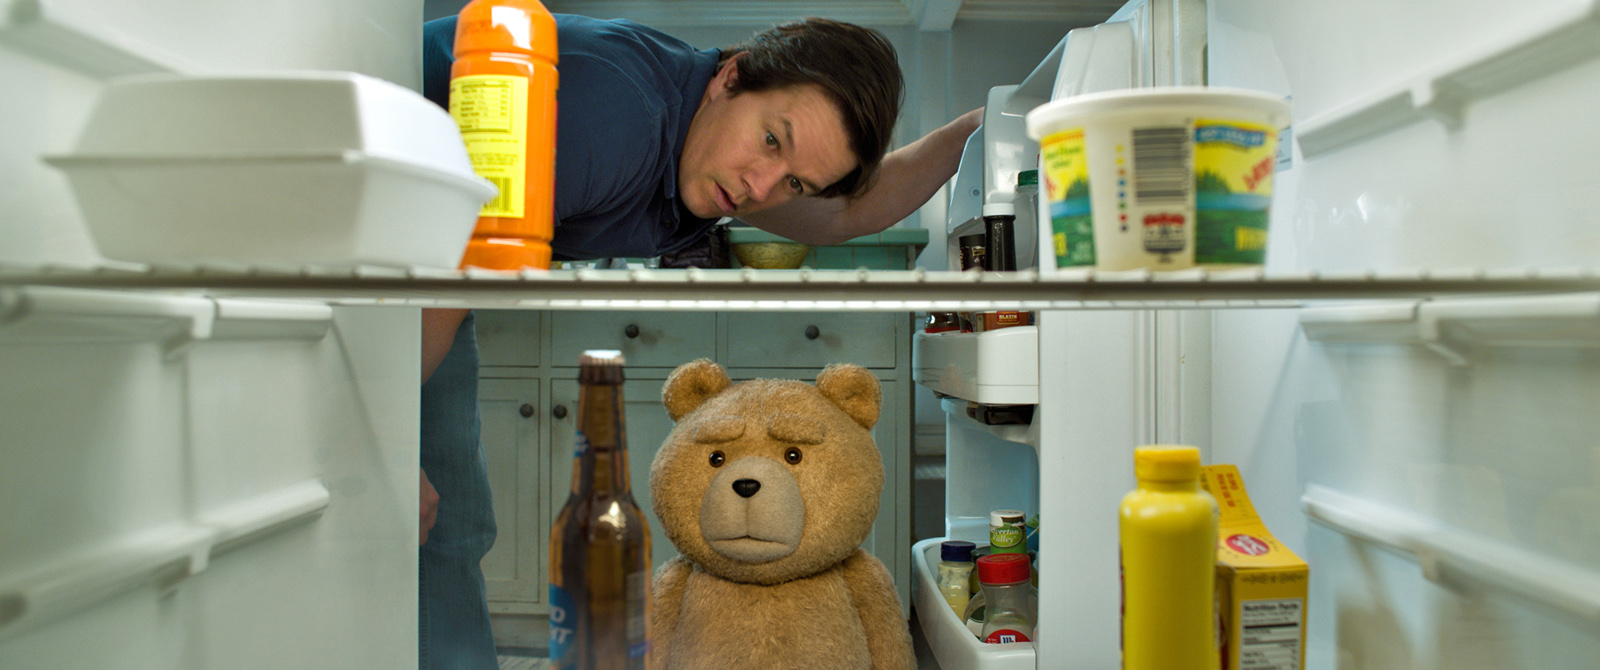 ted22